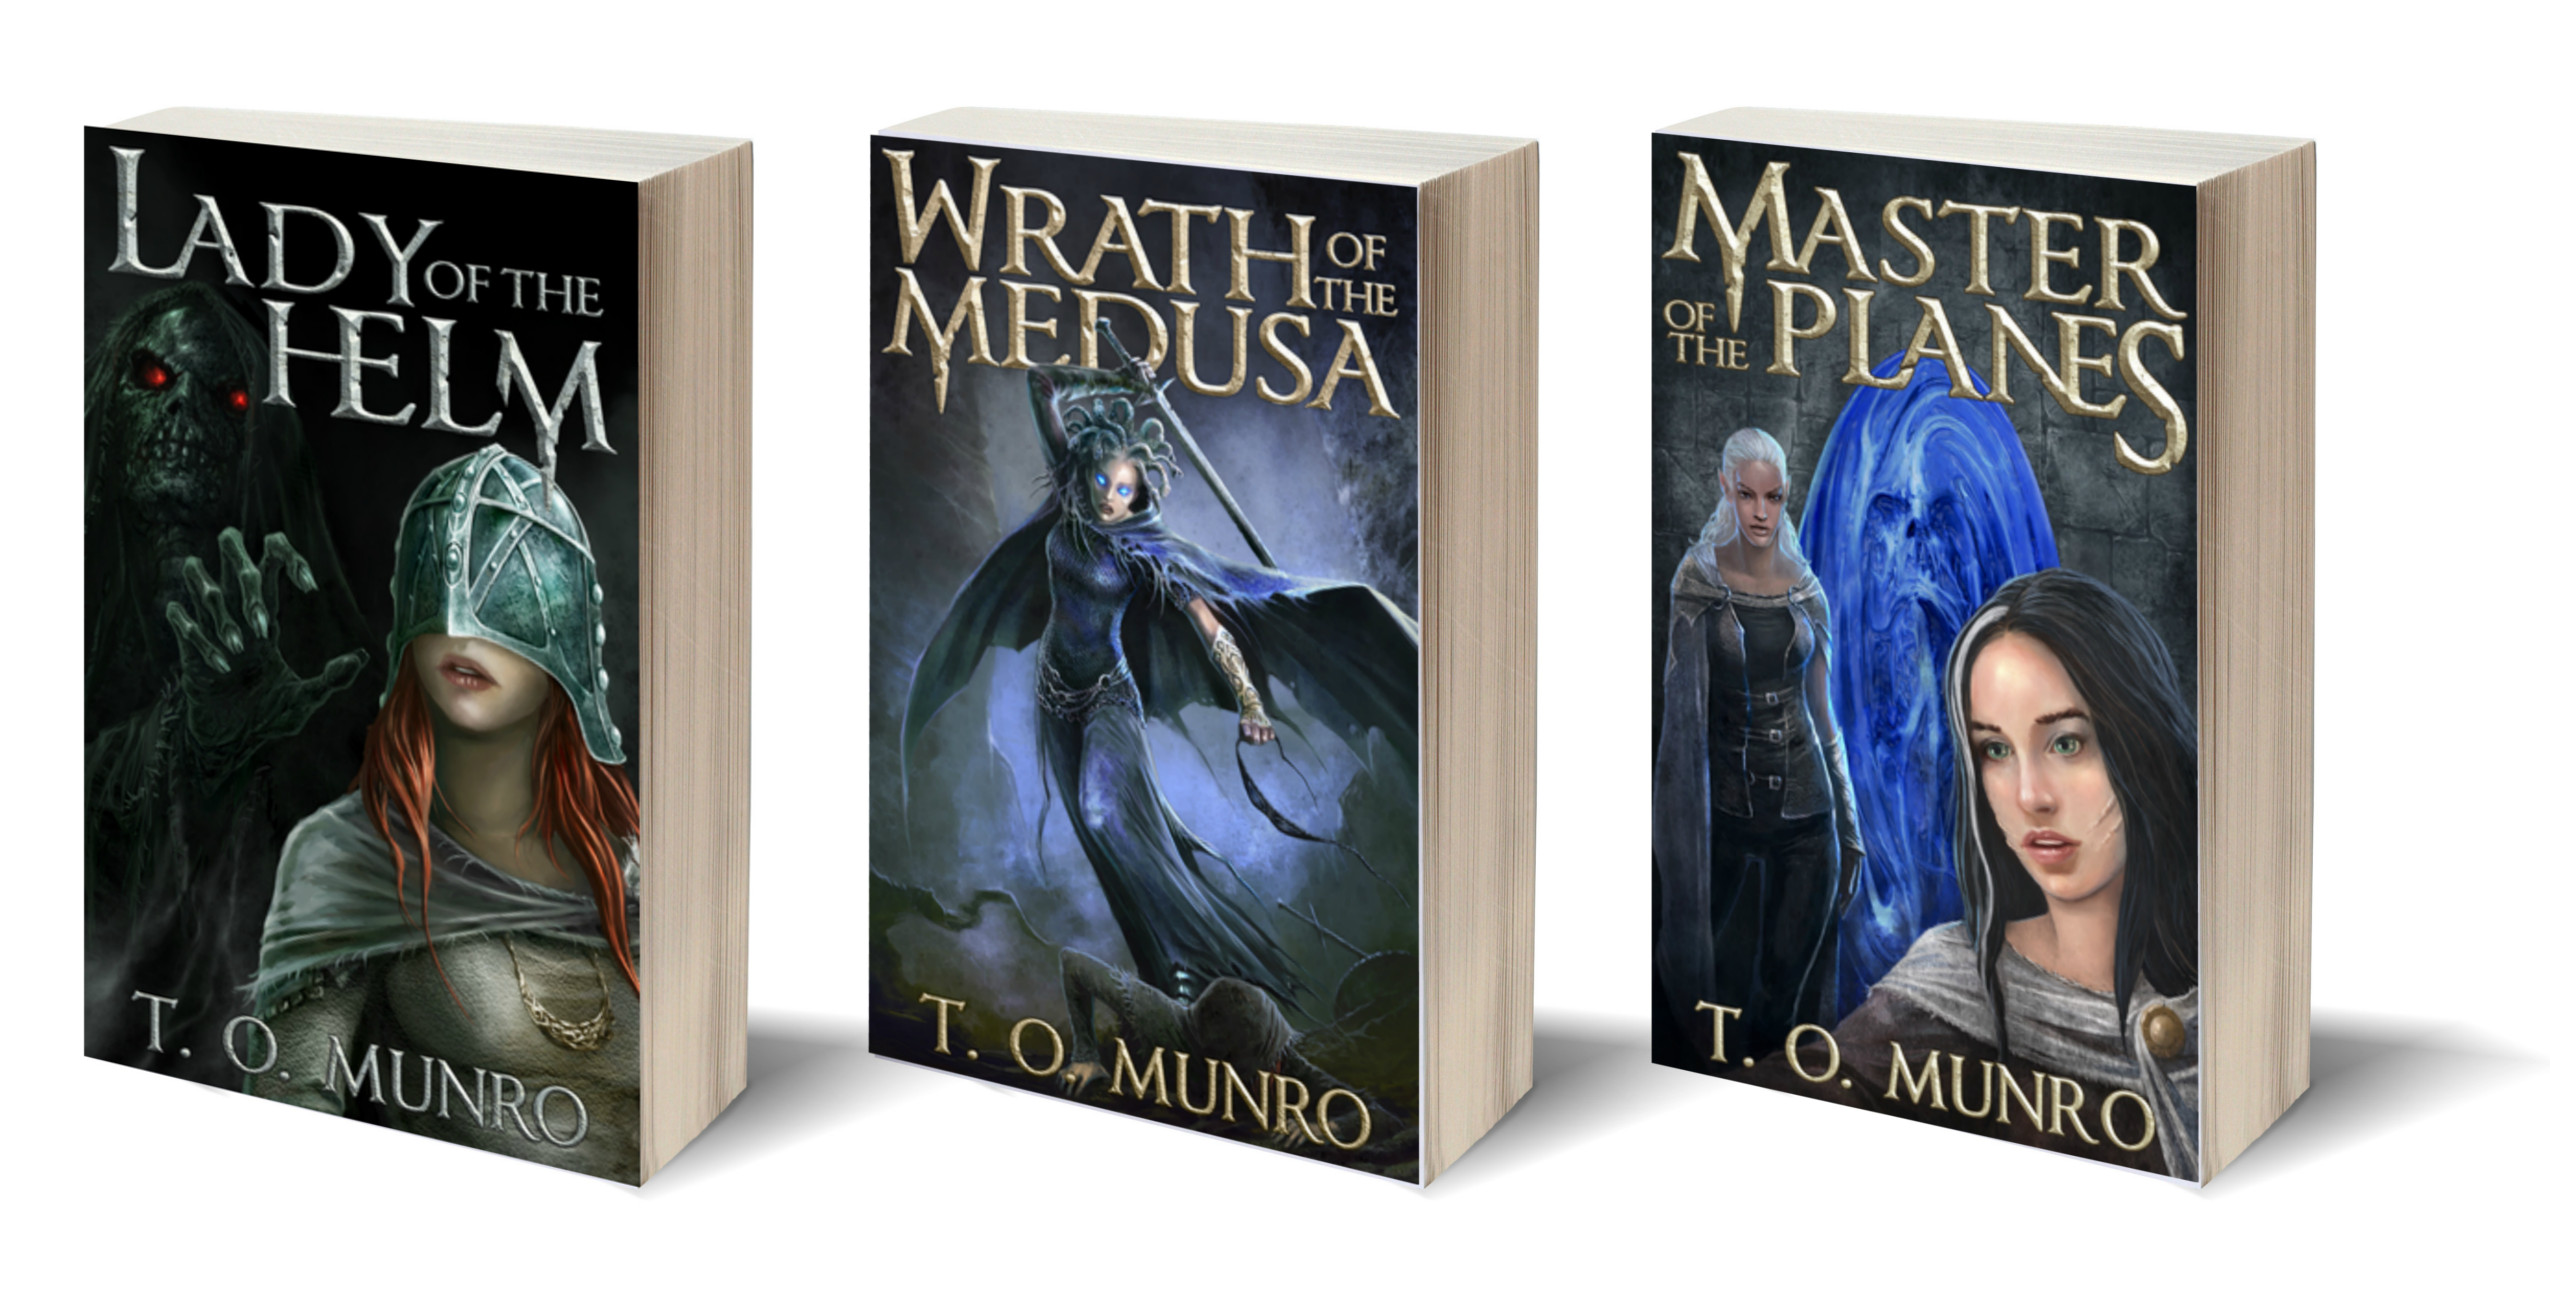 The Bloodline trilogy by T.O. Munro